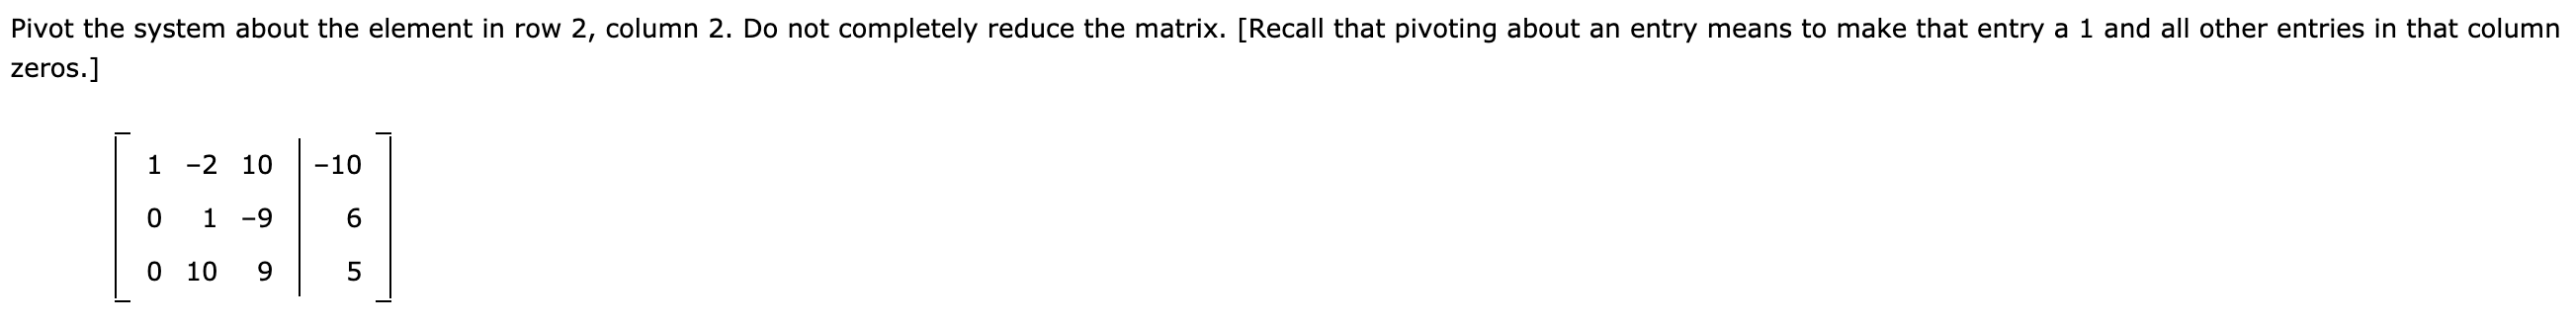 Pivot the system about the element in row 2, column 2. Do not completely reduce the matrix. [Recall that pivoting about an entry means to make that entry a 1 and all other entries in that column
zeros.]
1 -2 10
-10
0 1 -9
0 10
9.
